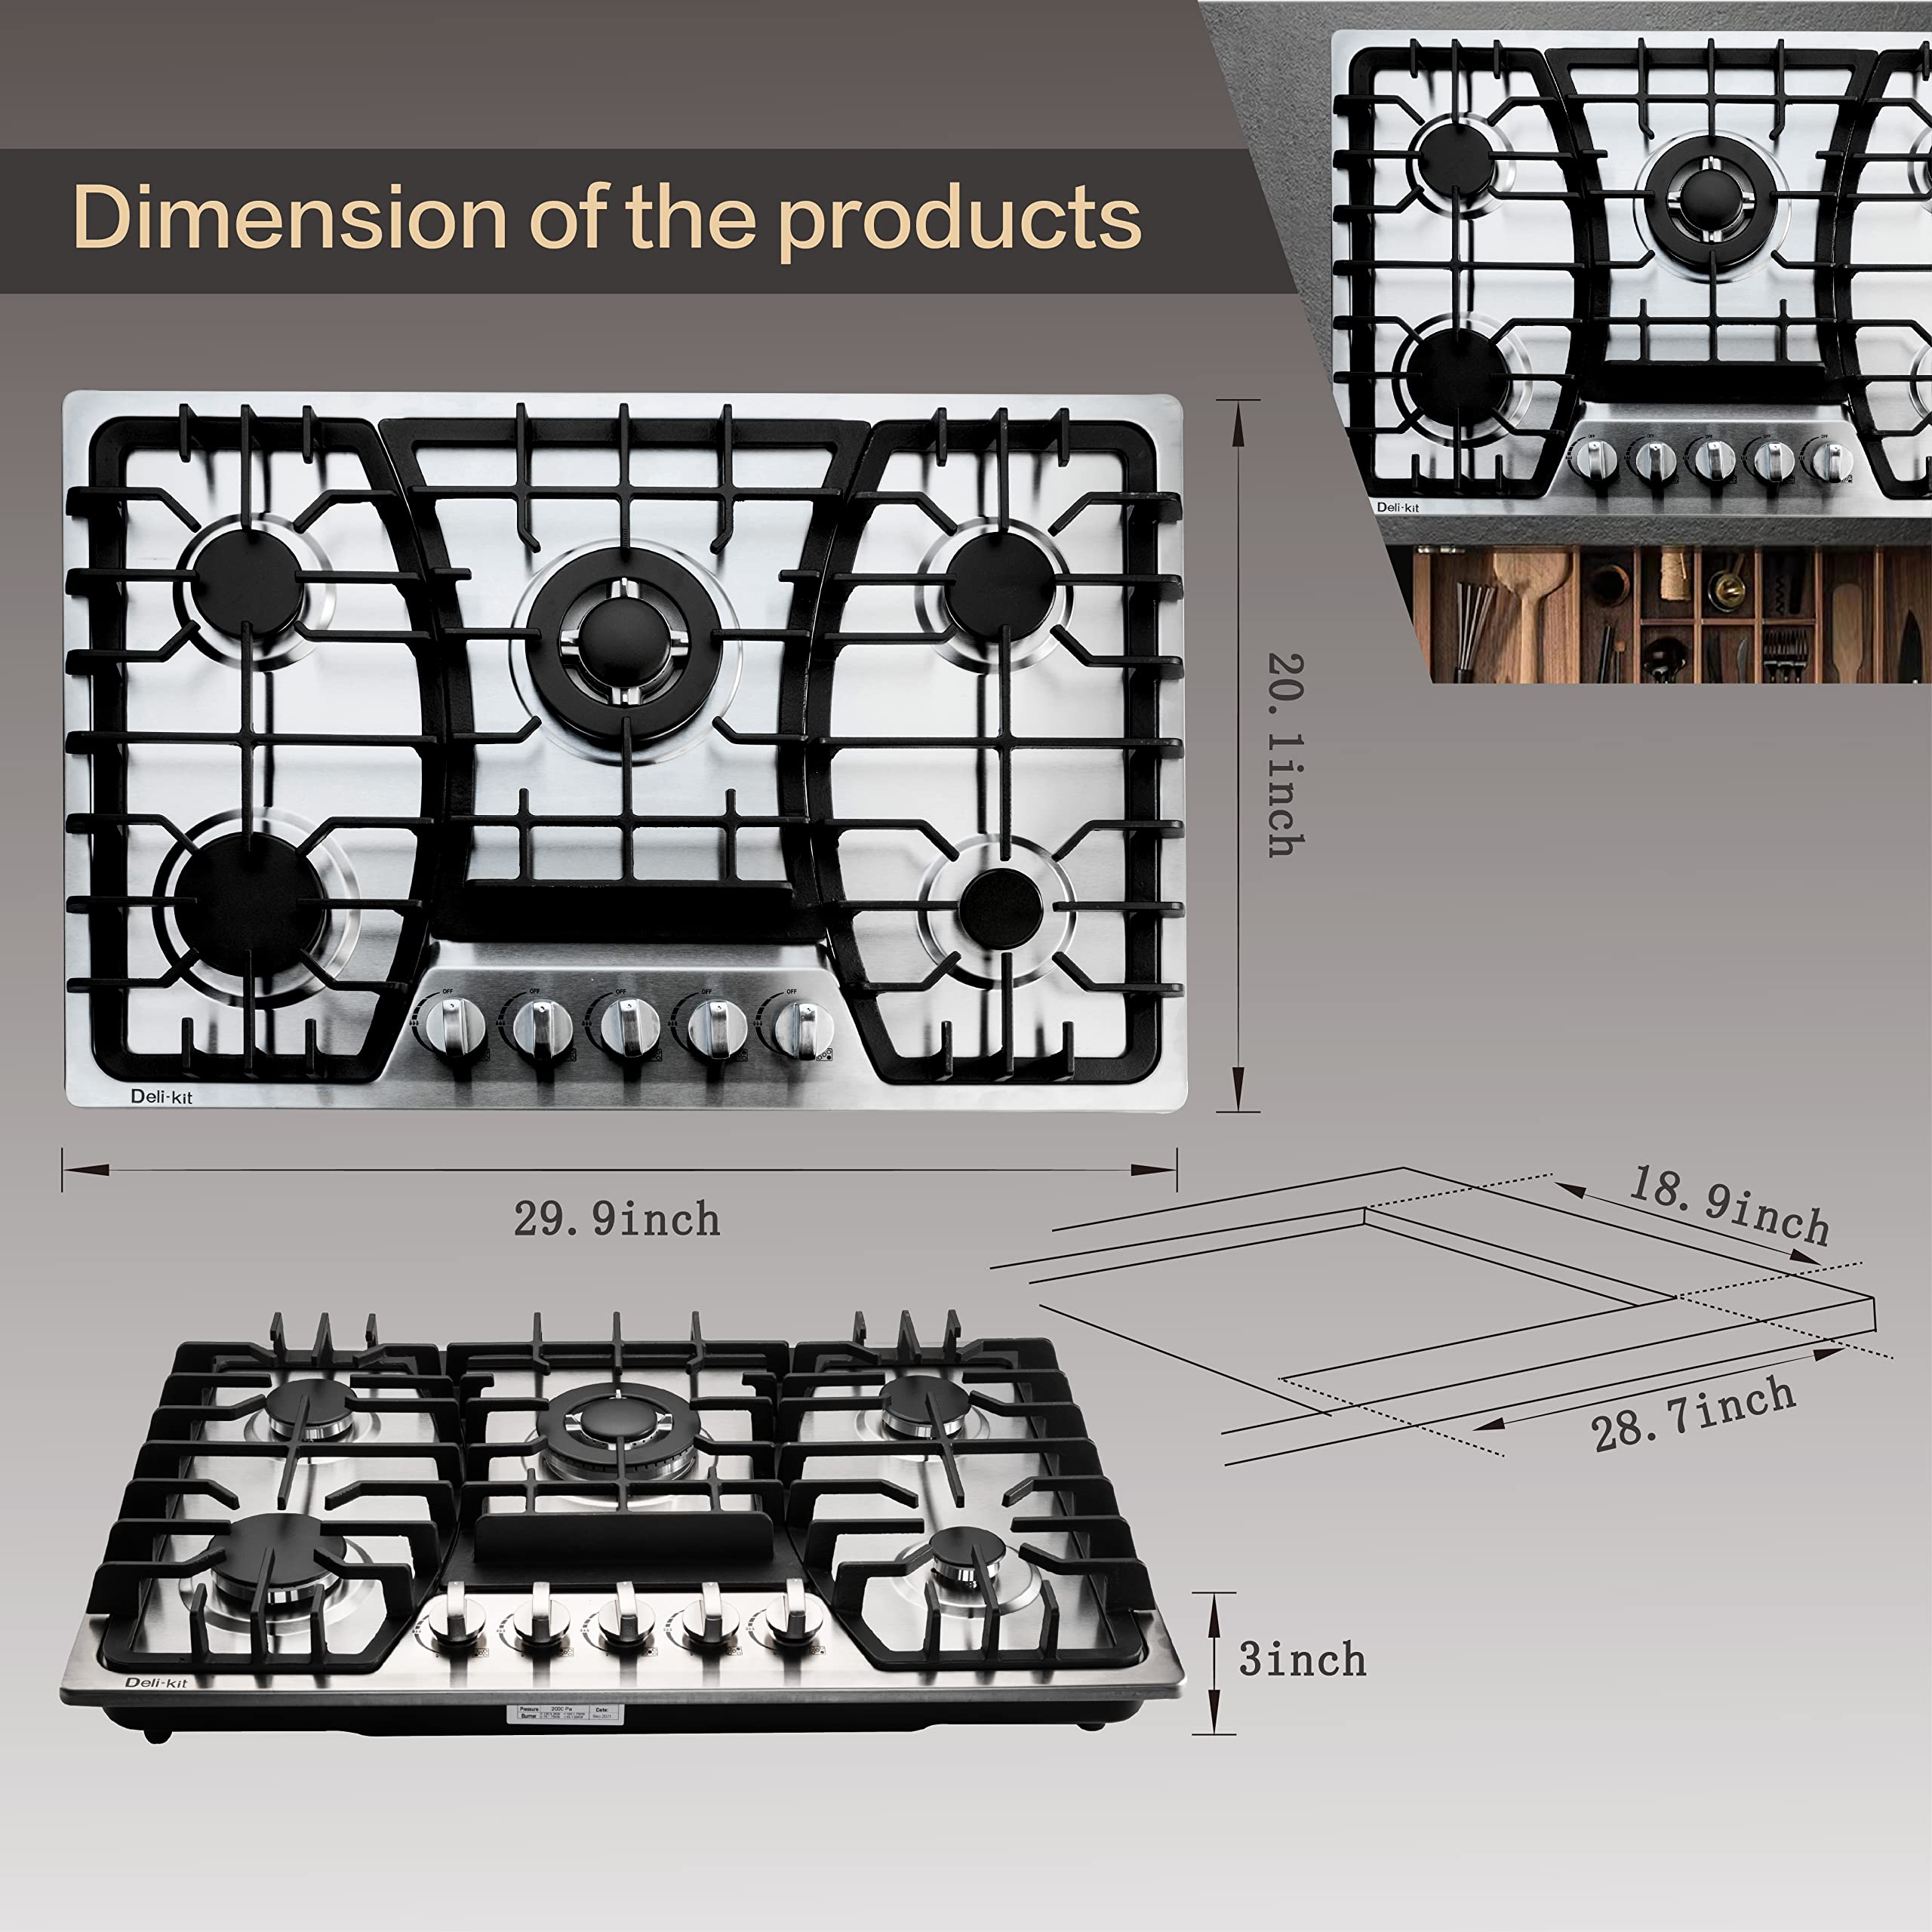 Deli-kit 30 inch Gas Cooktops Dual Fuel Sealed 5 Burners Gas Cooktop Built-In Stainless Steel Gas Hob DK257-A03 Gas Cooktop